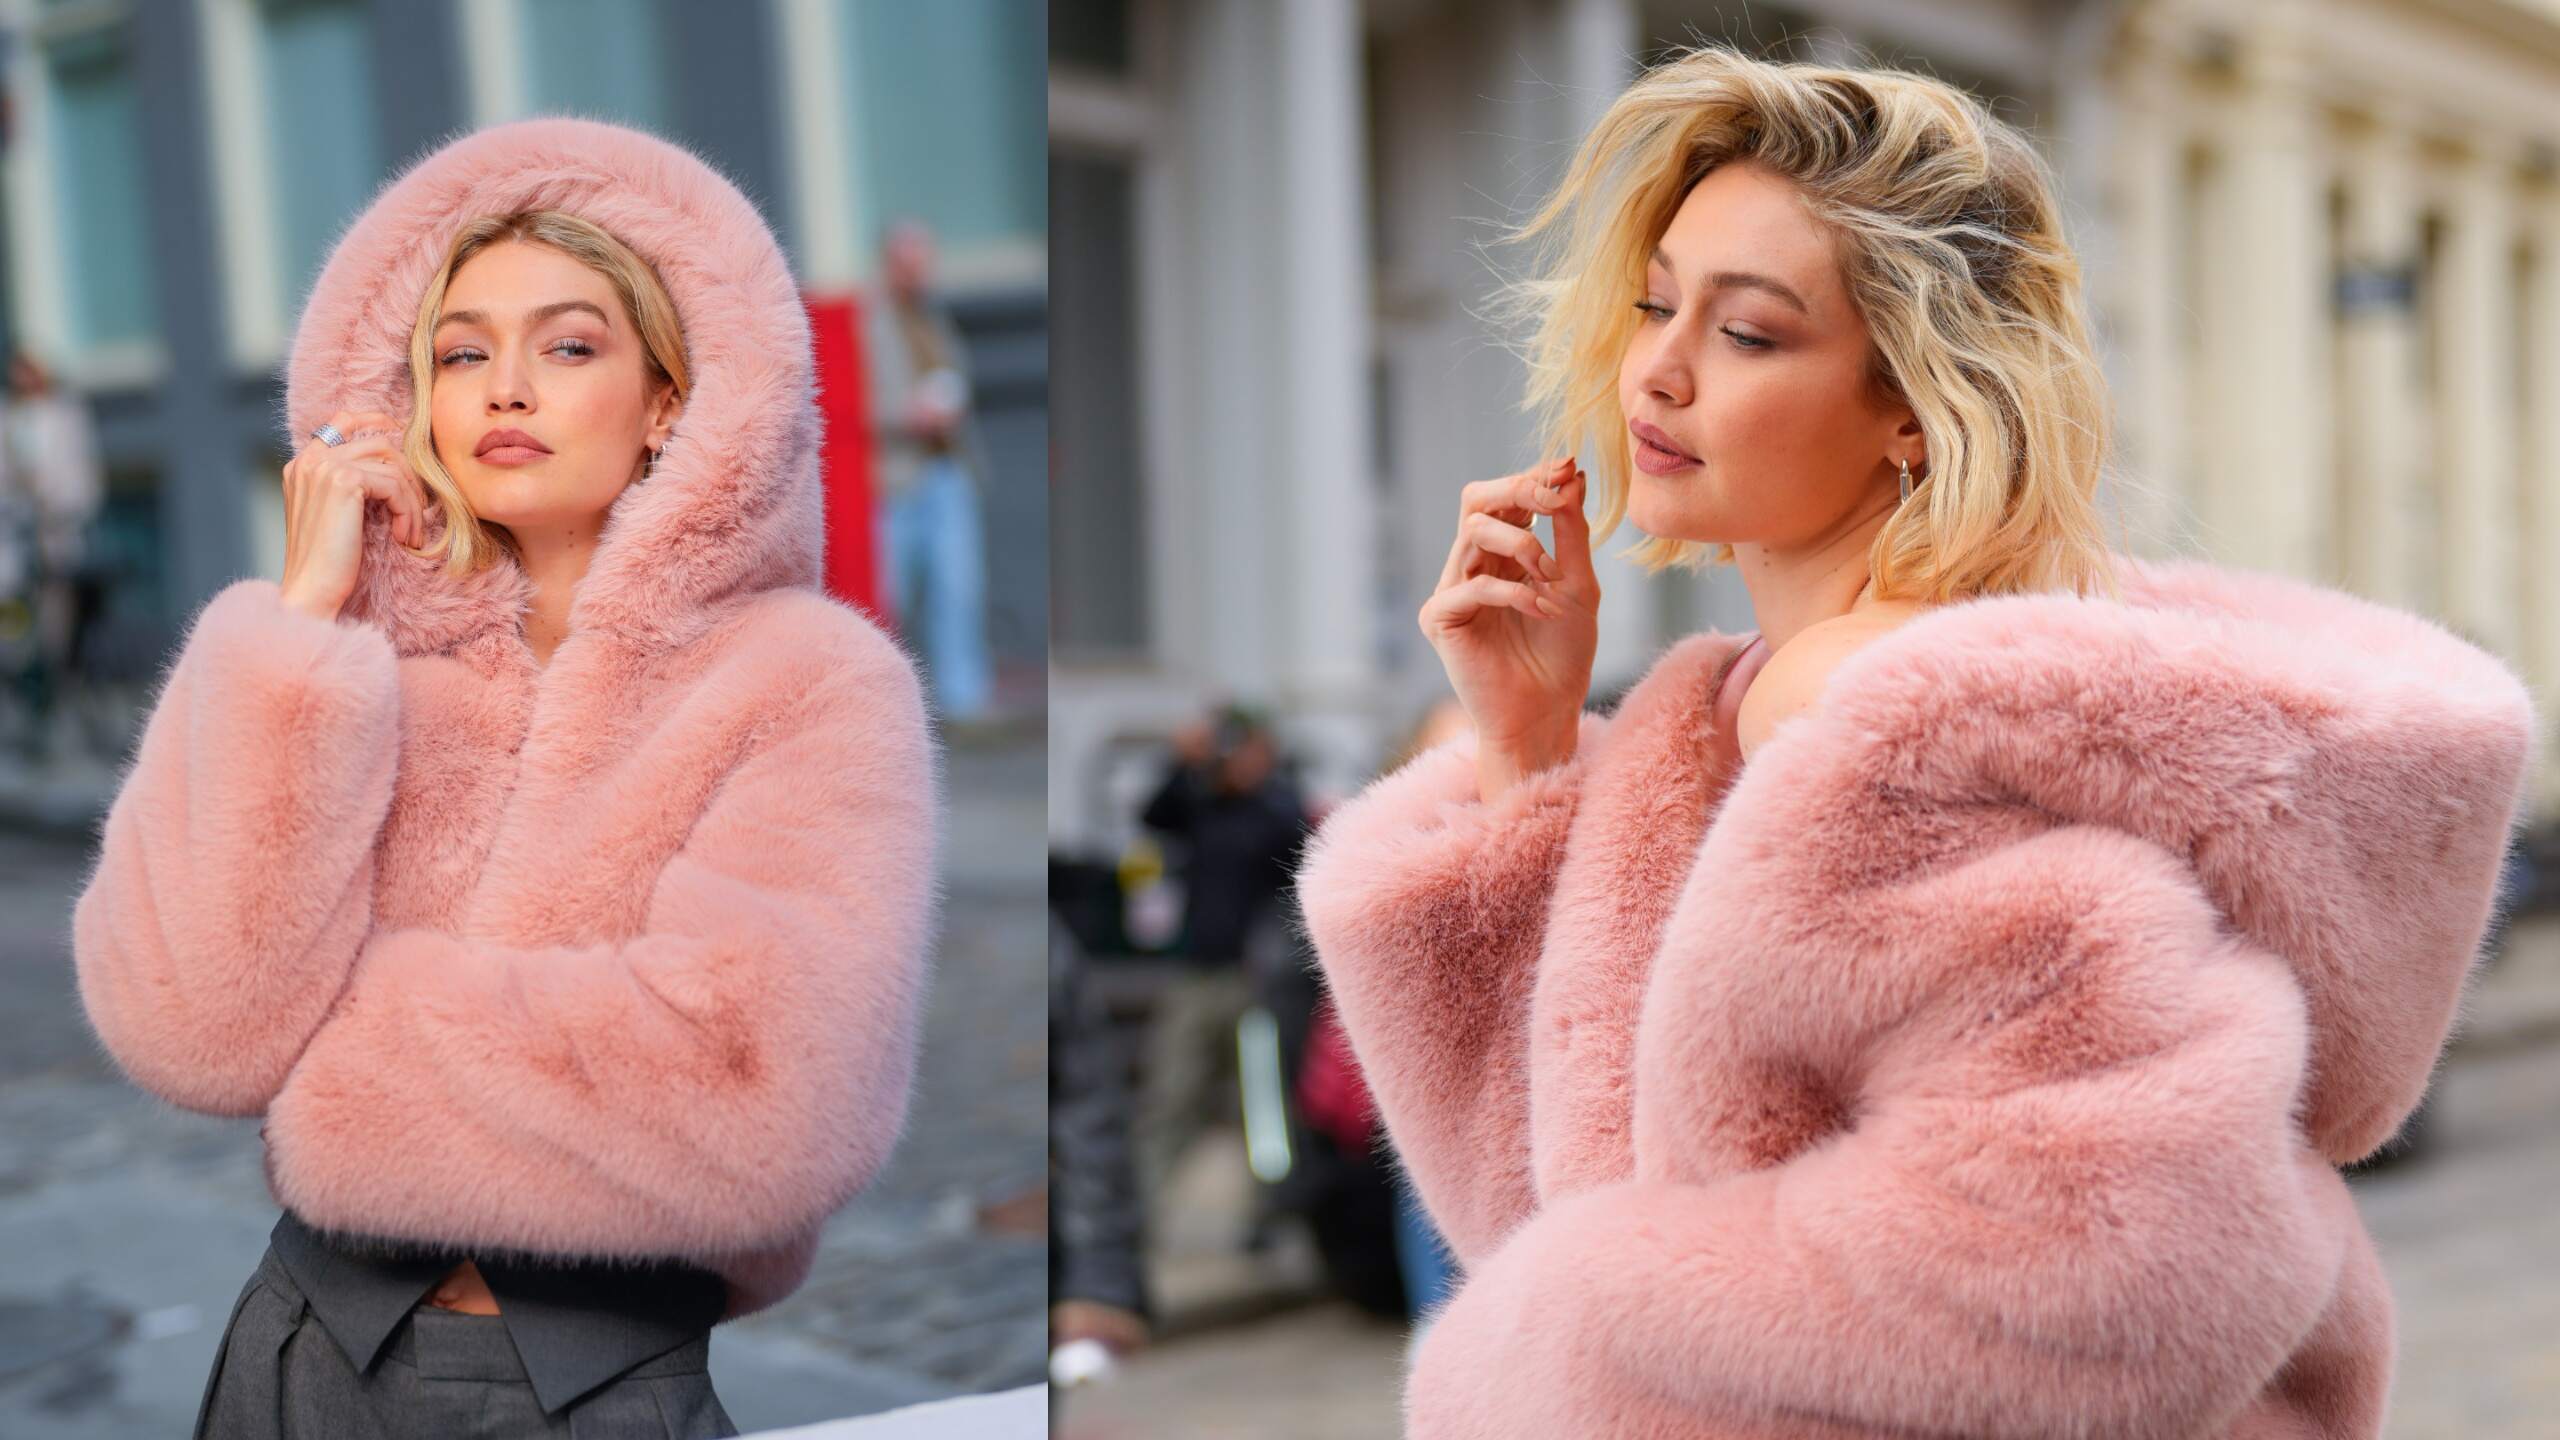 Model Gigi Hadid wears a pink faux fur coat and stands on an NYC street for a photoshoot